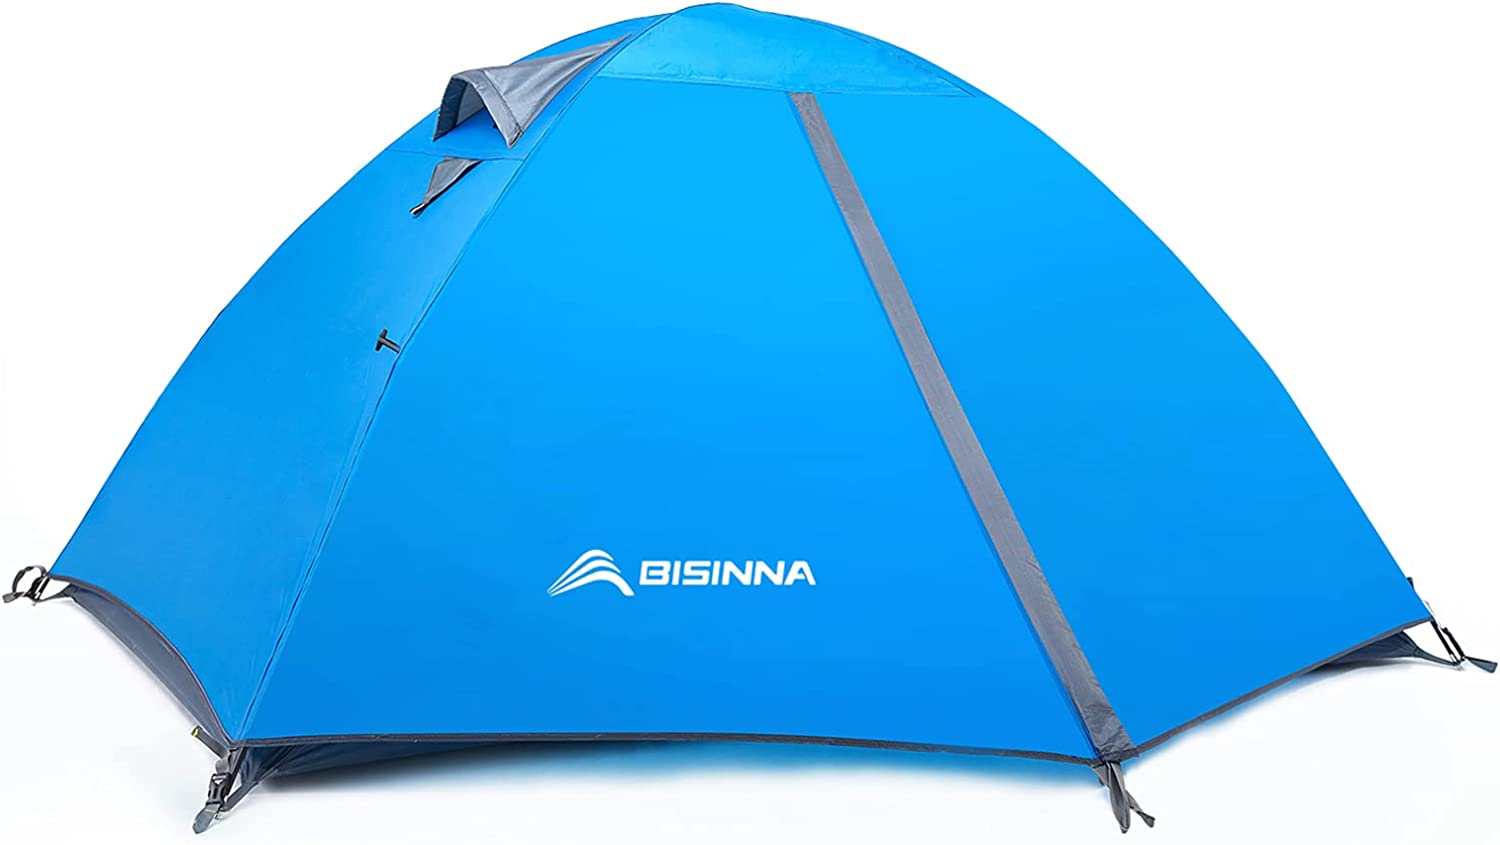 BISINNA 2 Person Camping Tent Lightweight Backpacking Tent Waterproof Windproof Two Doors Easy Setup Double Layer Outdoor Tents for Family Camping Hunting Hiking Mountaineering Travel